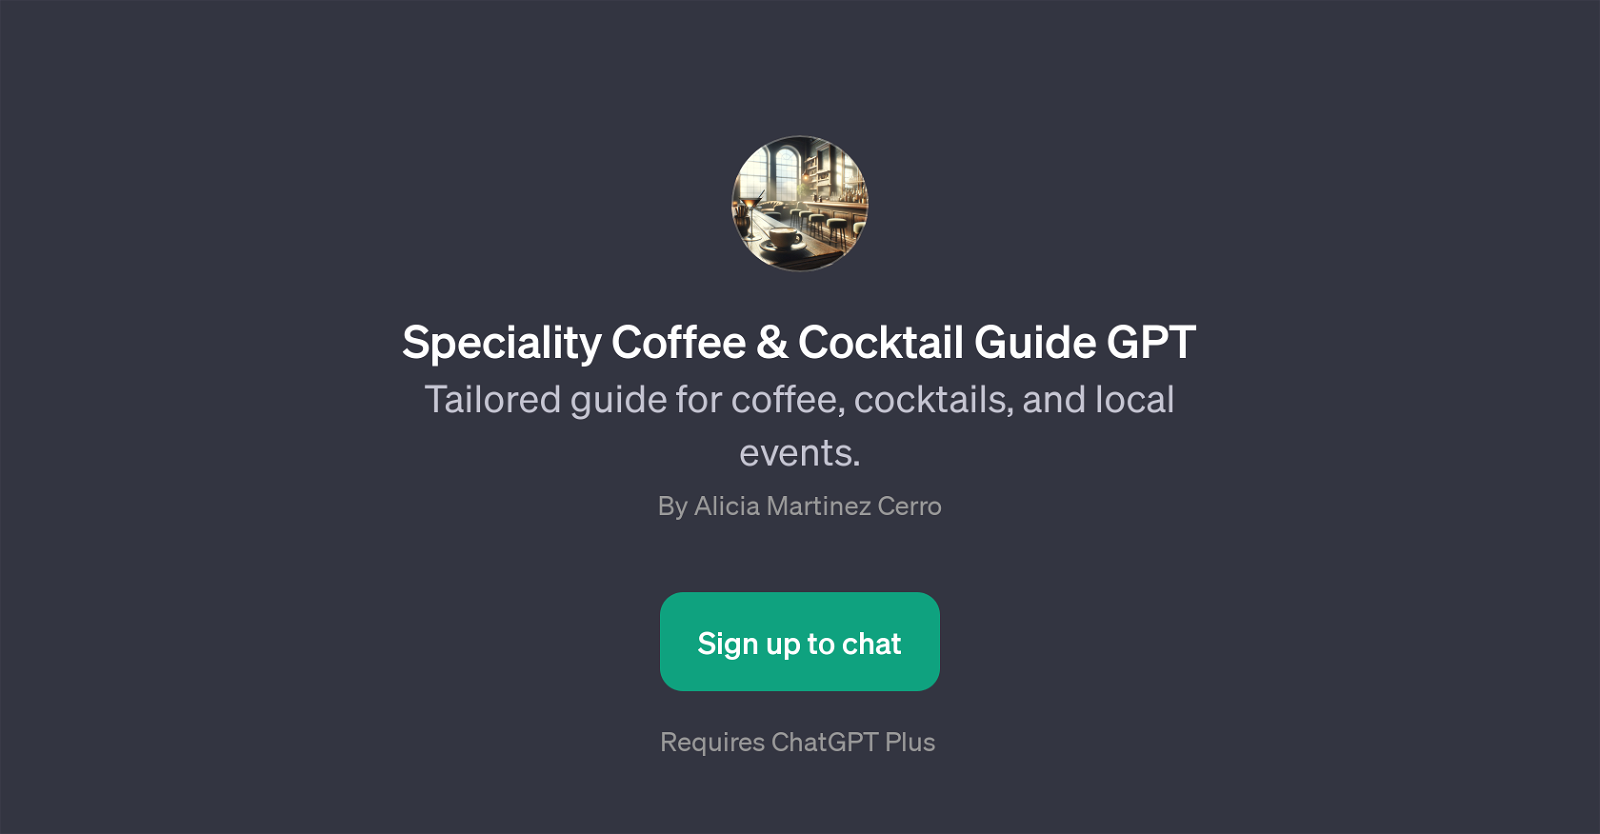 Speciality Coffee & Cocktail Guide GPT website